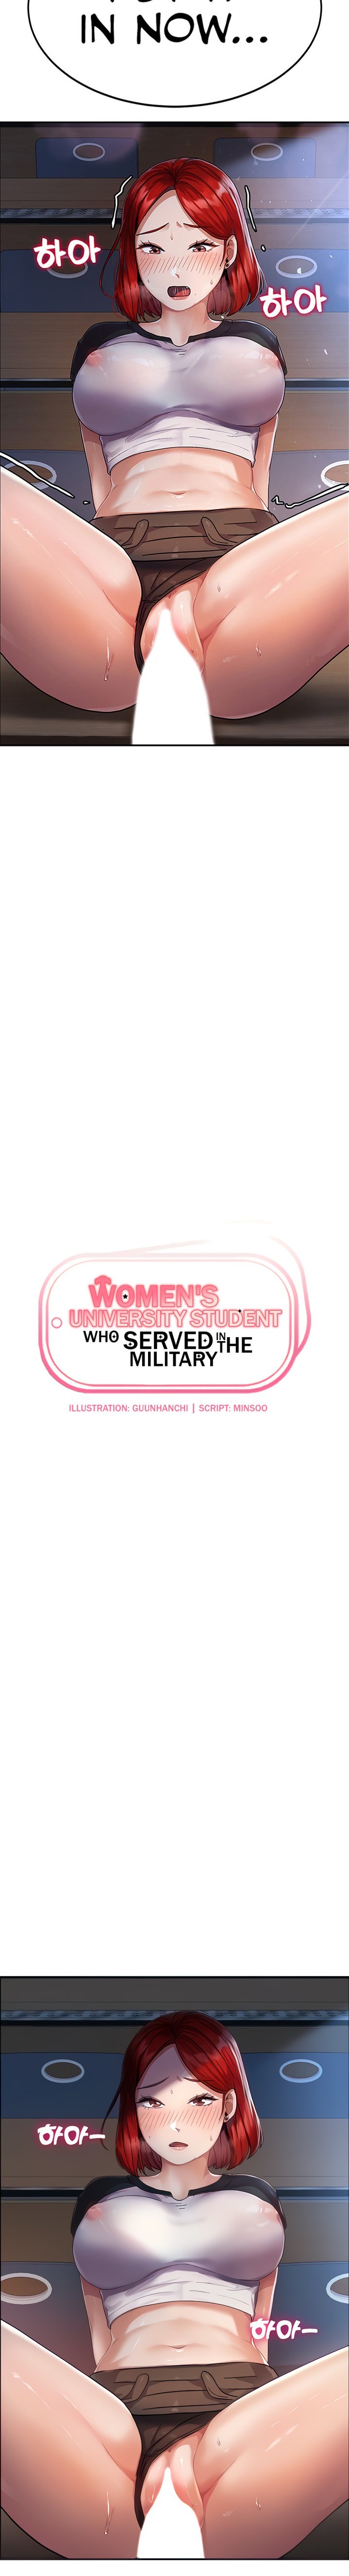 Women’s University Student who Served in the Military Chapter 4 - Page 2